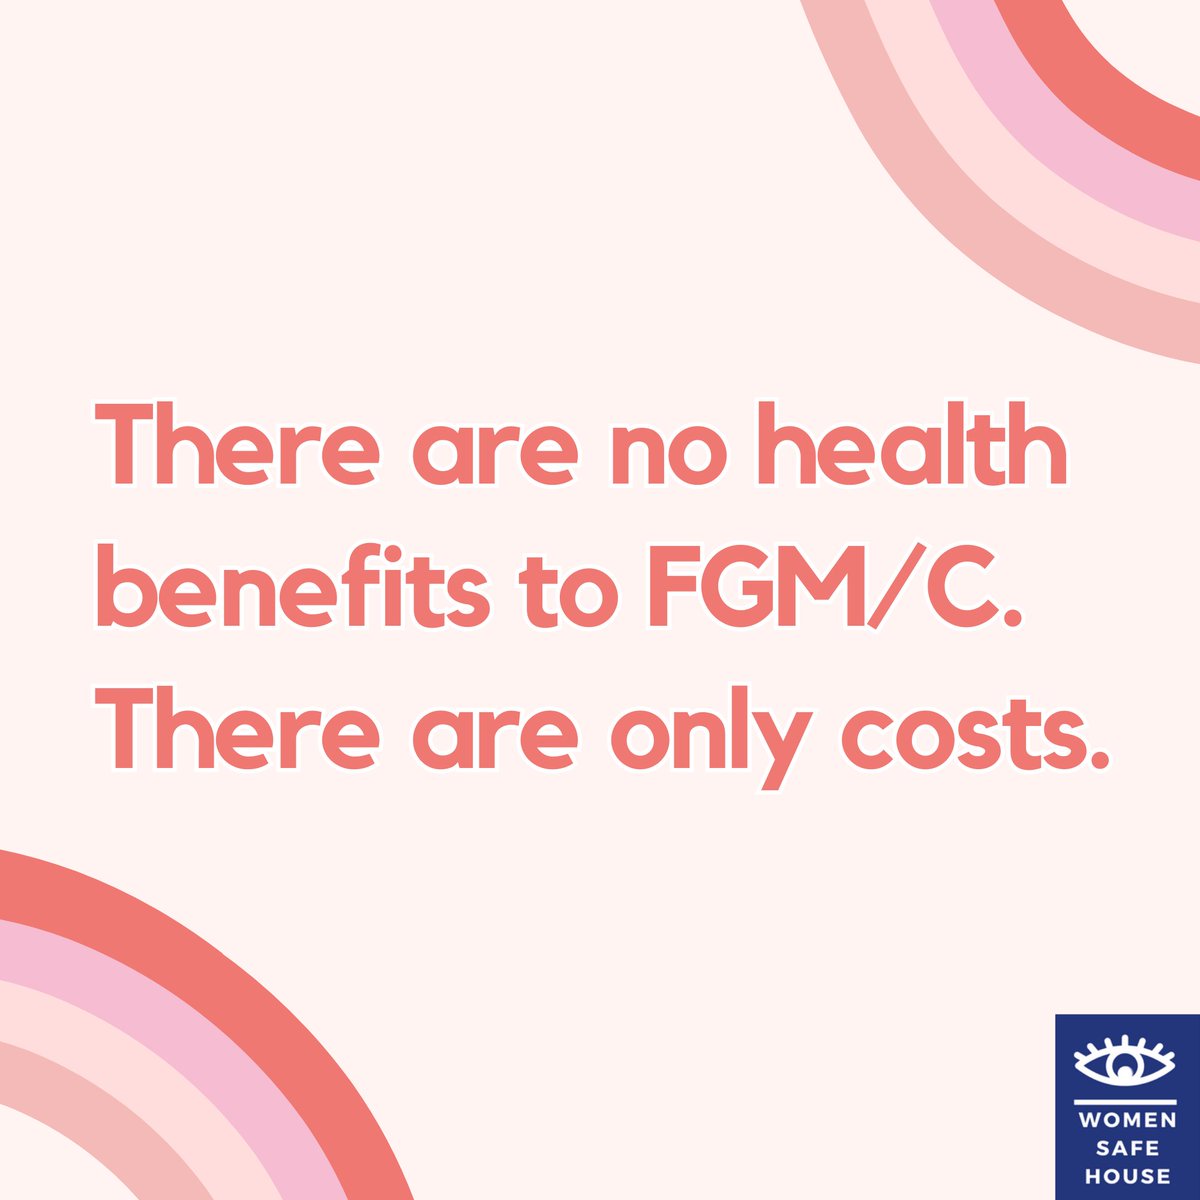 Female genital mutilation/cutting (FGM/C) has no health benefits. Rather, the practice can put women’s physical, mental, and sexual health at risk, from causing increased susceptibility to infection to creating childbirth complications.

#womensafehouse #women #fgmc #endfgmc